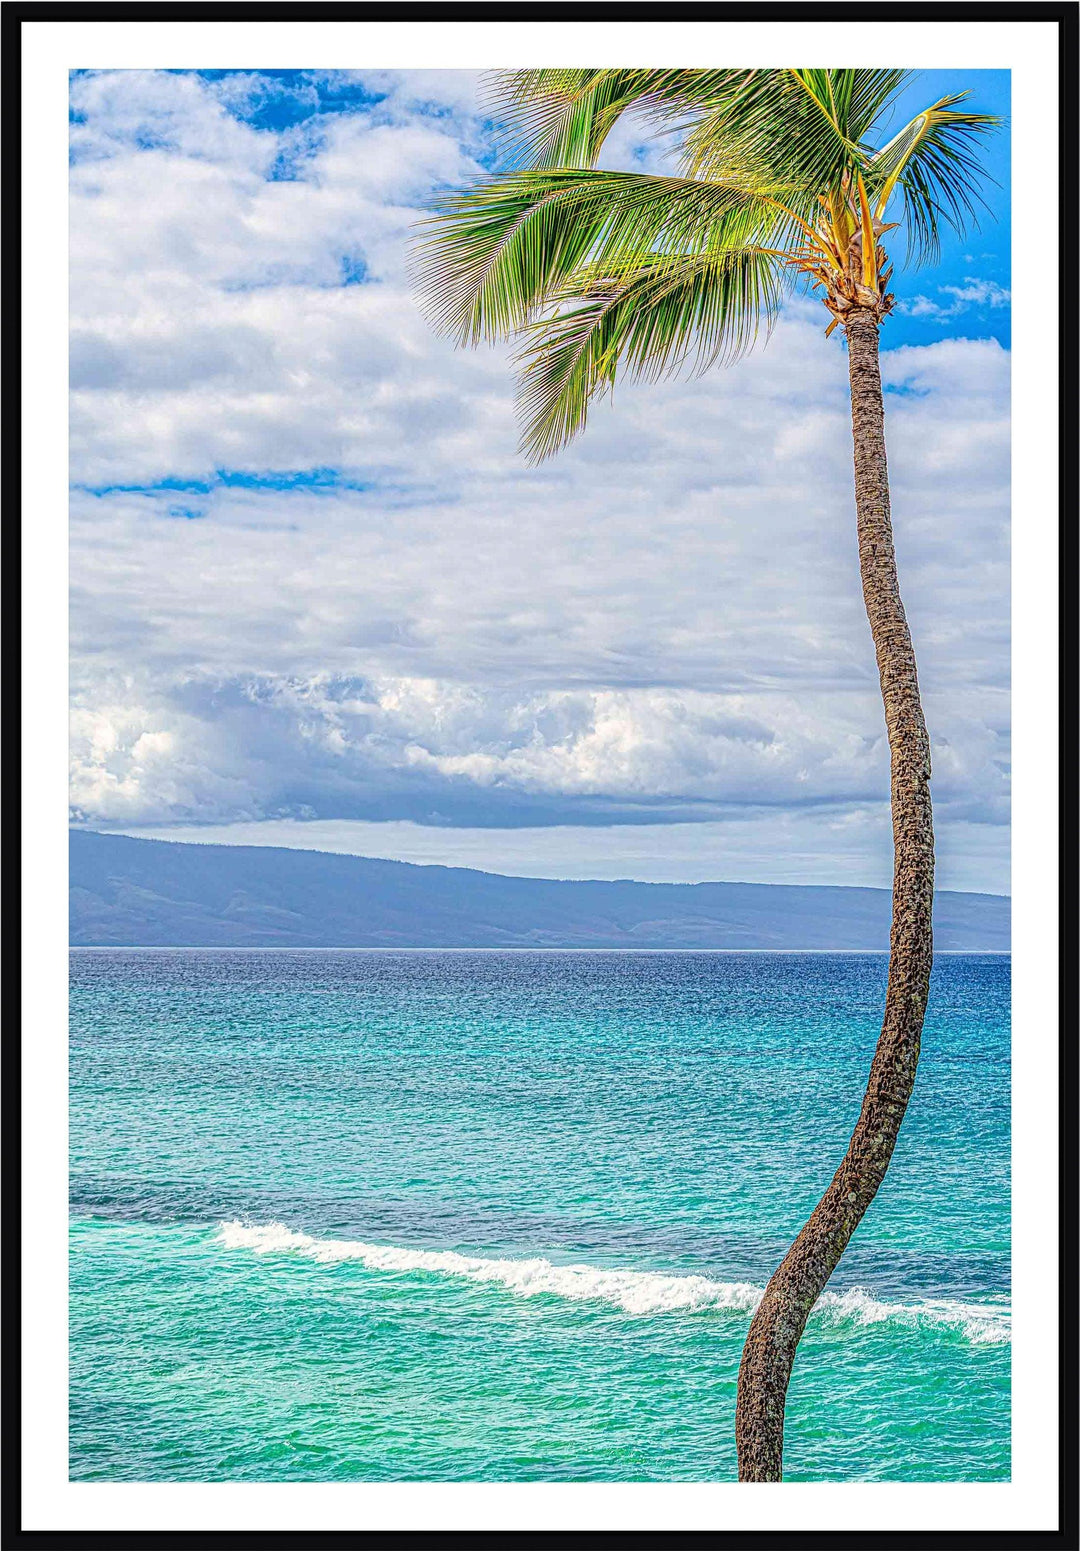 Solo - Living Moments Media - 3500-5500, 800-3500, Best Wall Artwork, blue, green, Hawaii, Island, lahaina, maui, Maui Hawaii Fine Art Photography, Maui Hawaii Wall Art, ocean, open-edition, over-5500, Palm Trees, palm-tree, size-16x-24, size-24-x-36, size-40-x-60, teal, vertical, Water, waves